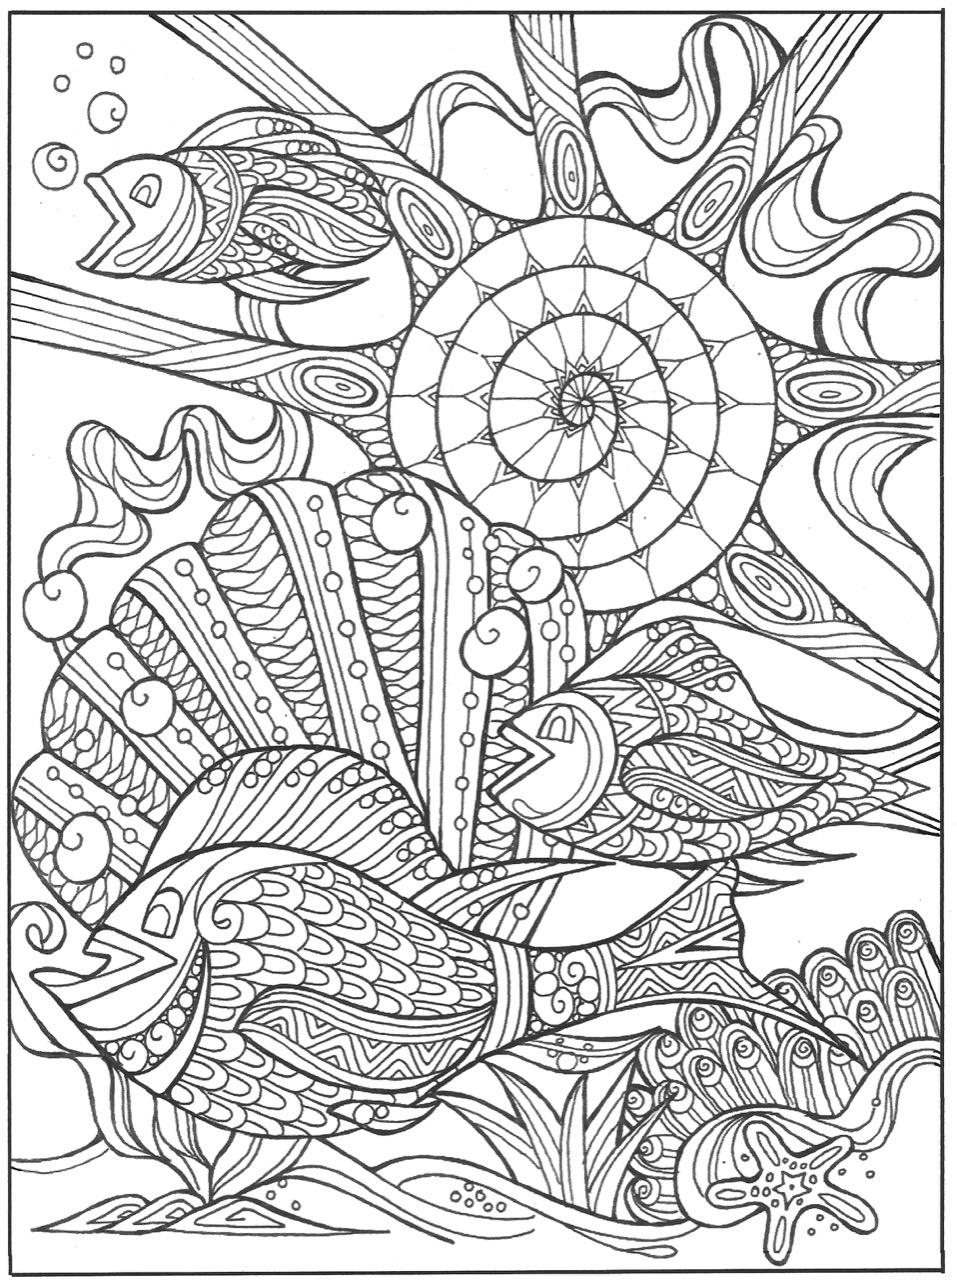 Under the Sea in Paradise Coloring Page | FaveCrafts.com